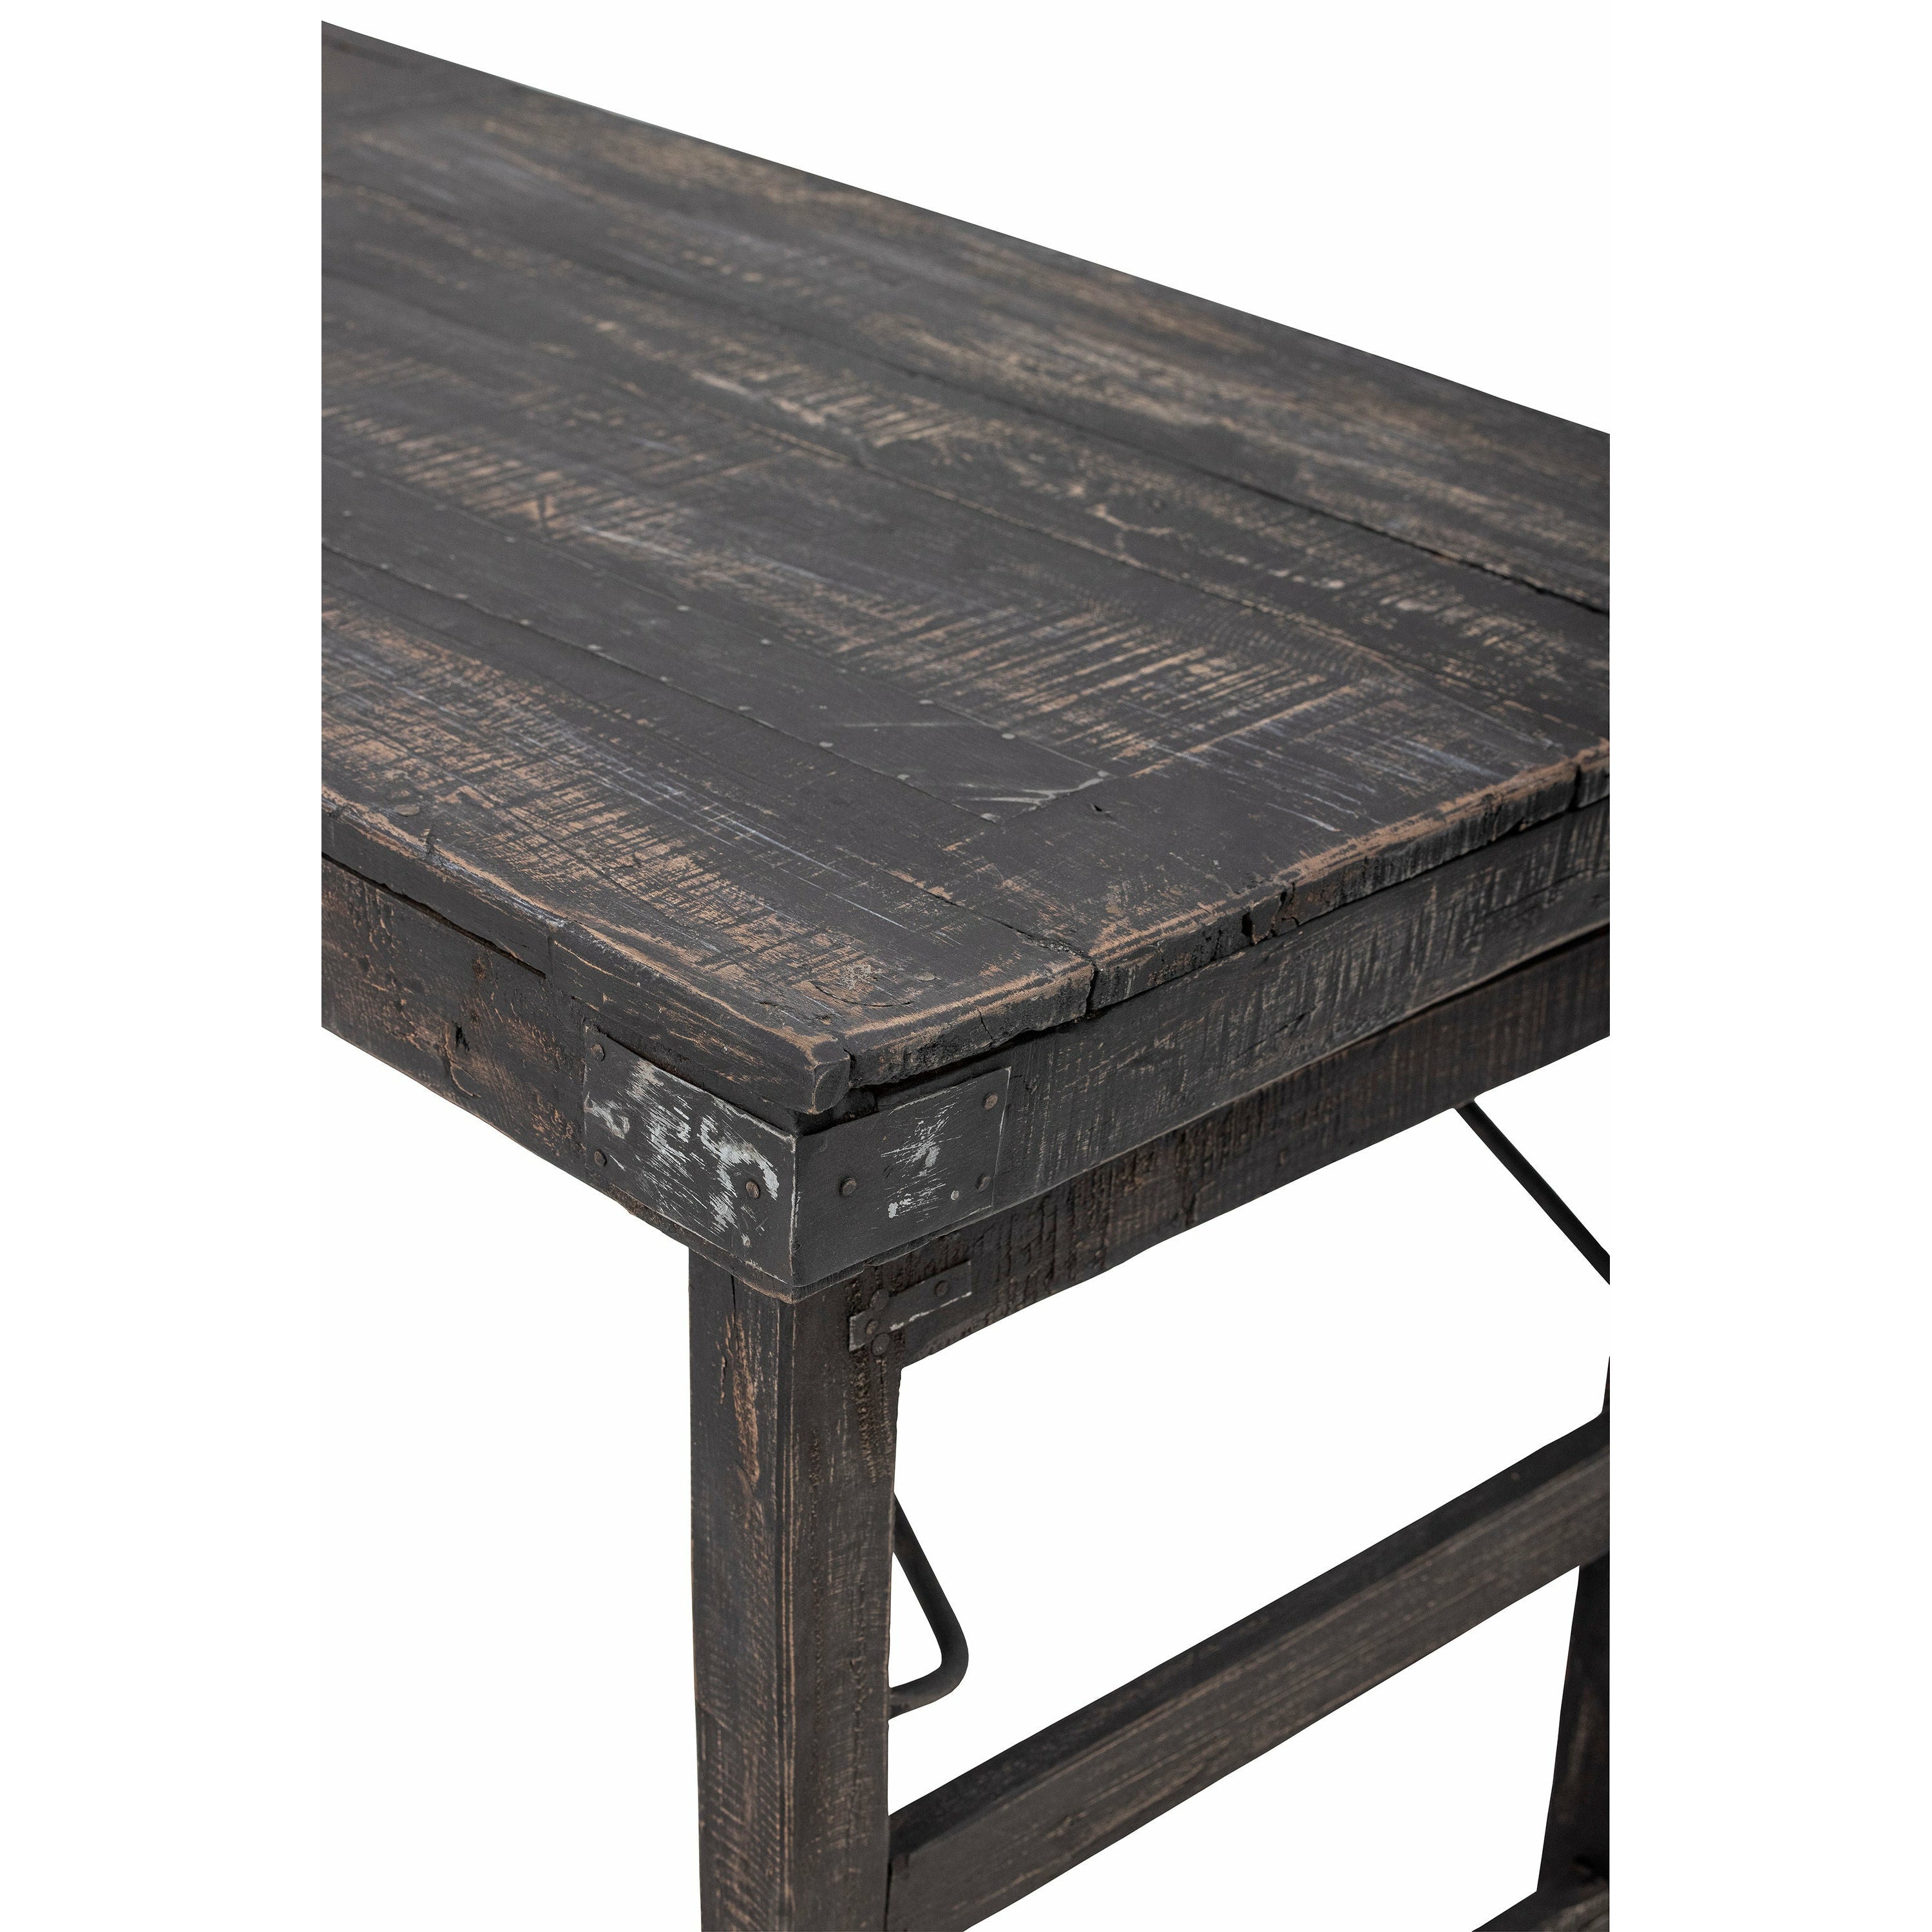 Creative Collection Cali Dining Table, Black, Recycled Wood